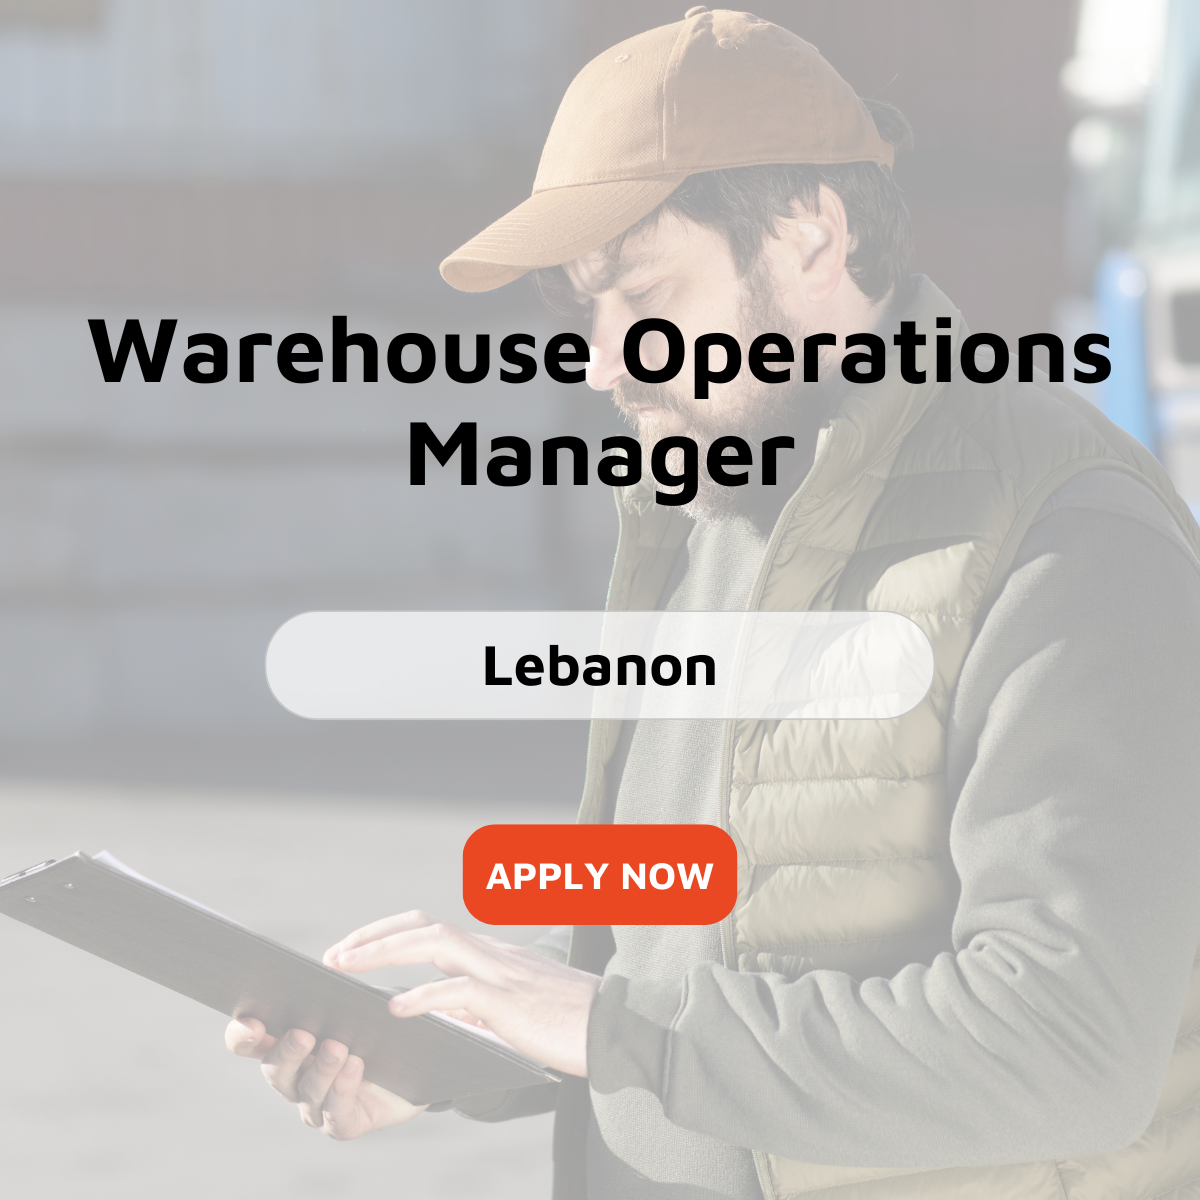 Warehouse Operations Manager